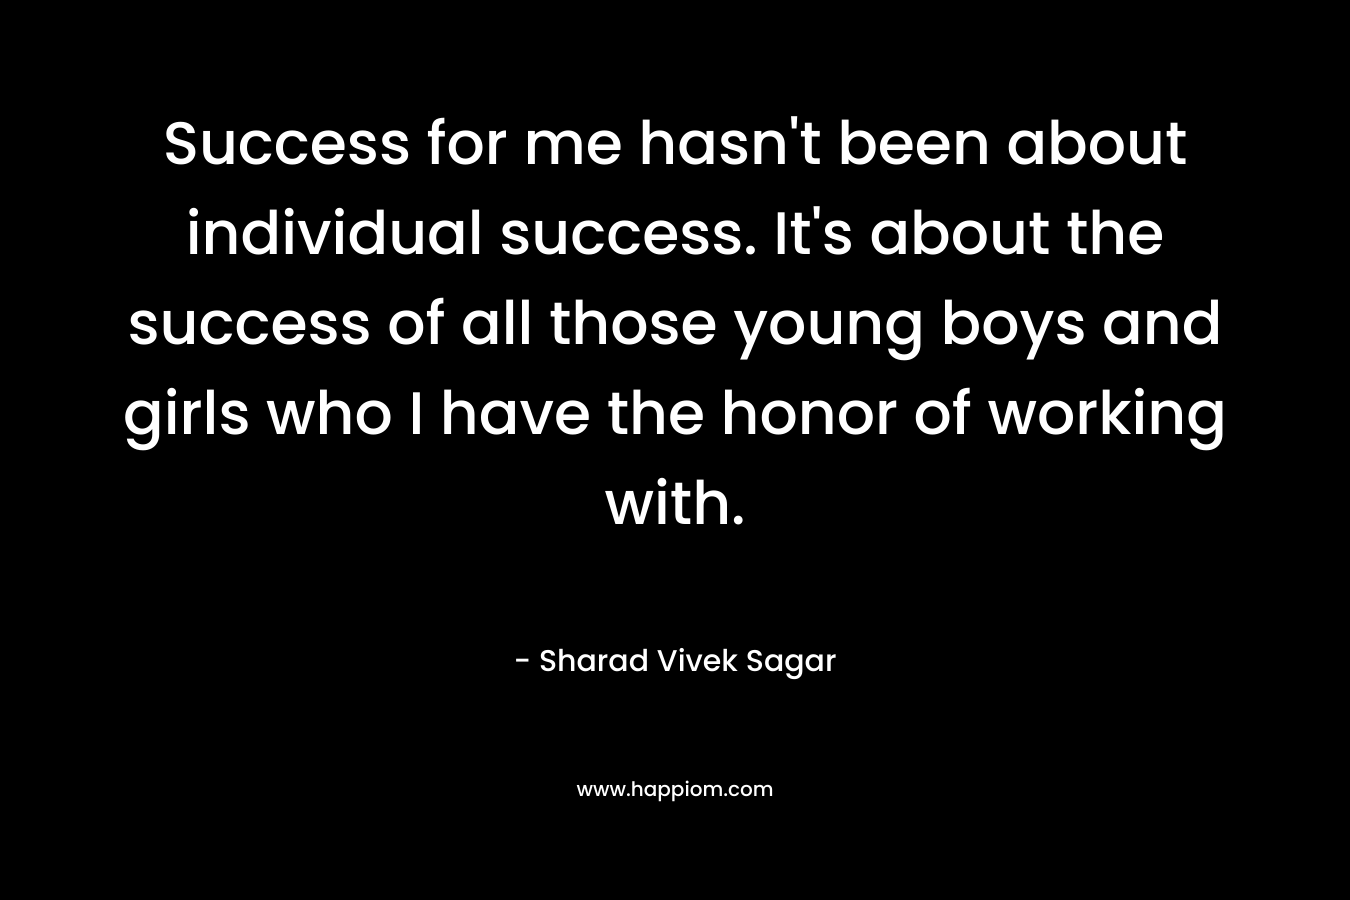 Success for me hasn't been about individual success. It's about the success of all those young boys and girls who I have the honor of working with.